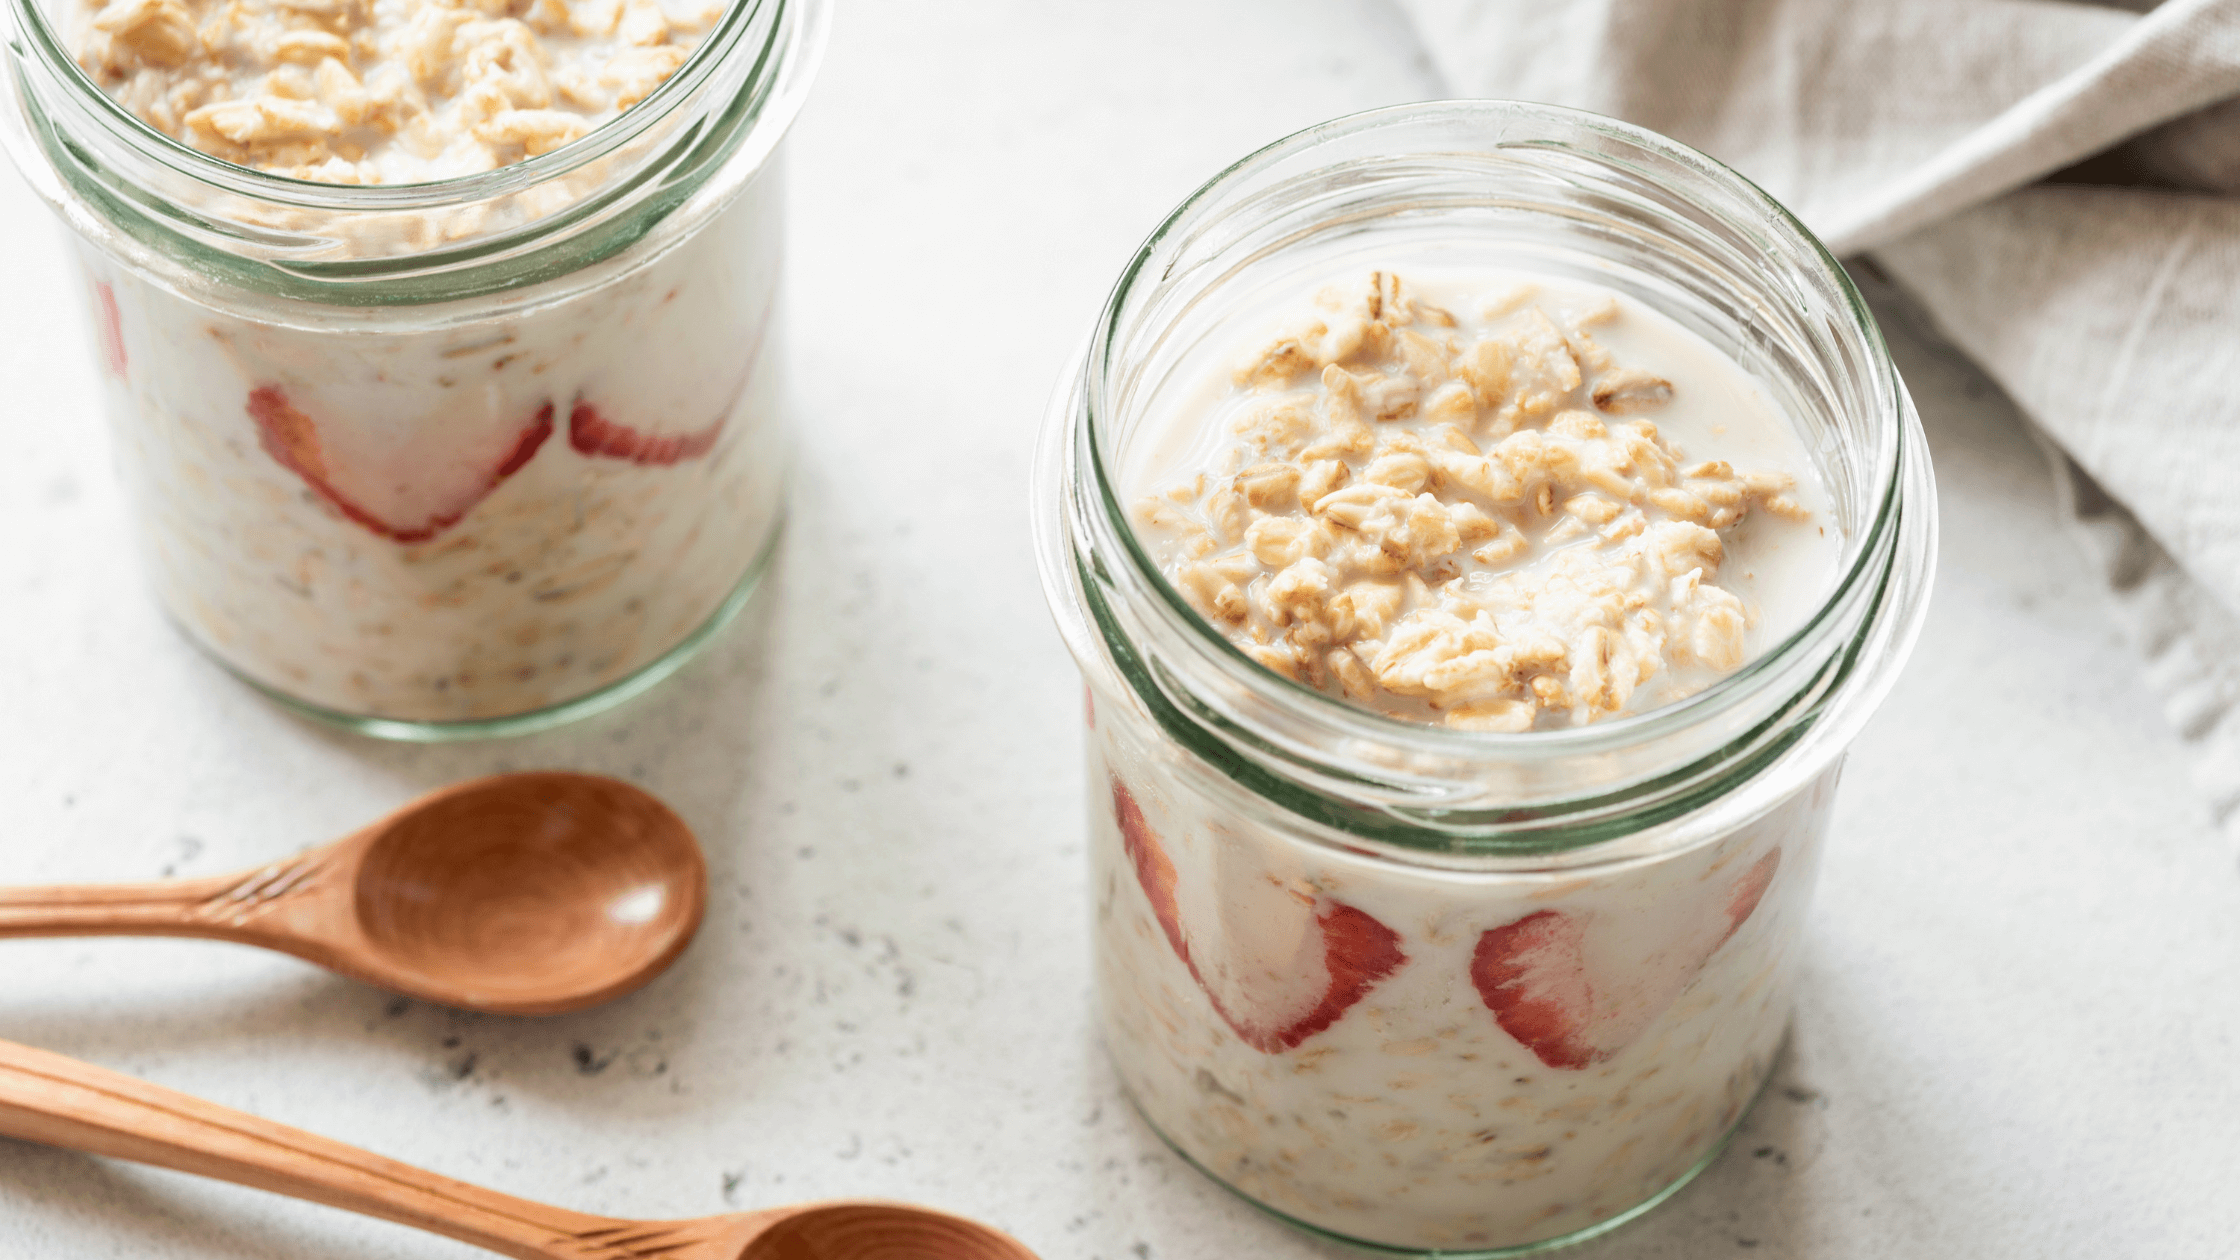 6 Simple & Insanely Delicious Overnight Oats Recipes That'll Make You Love Breakfast Again 1